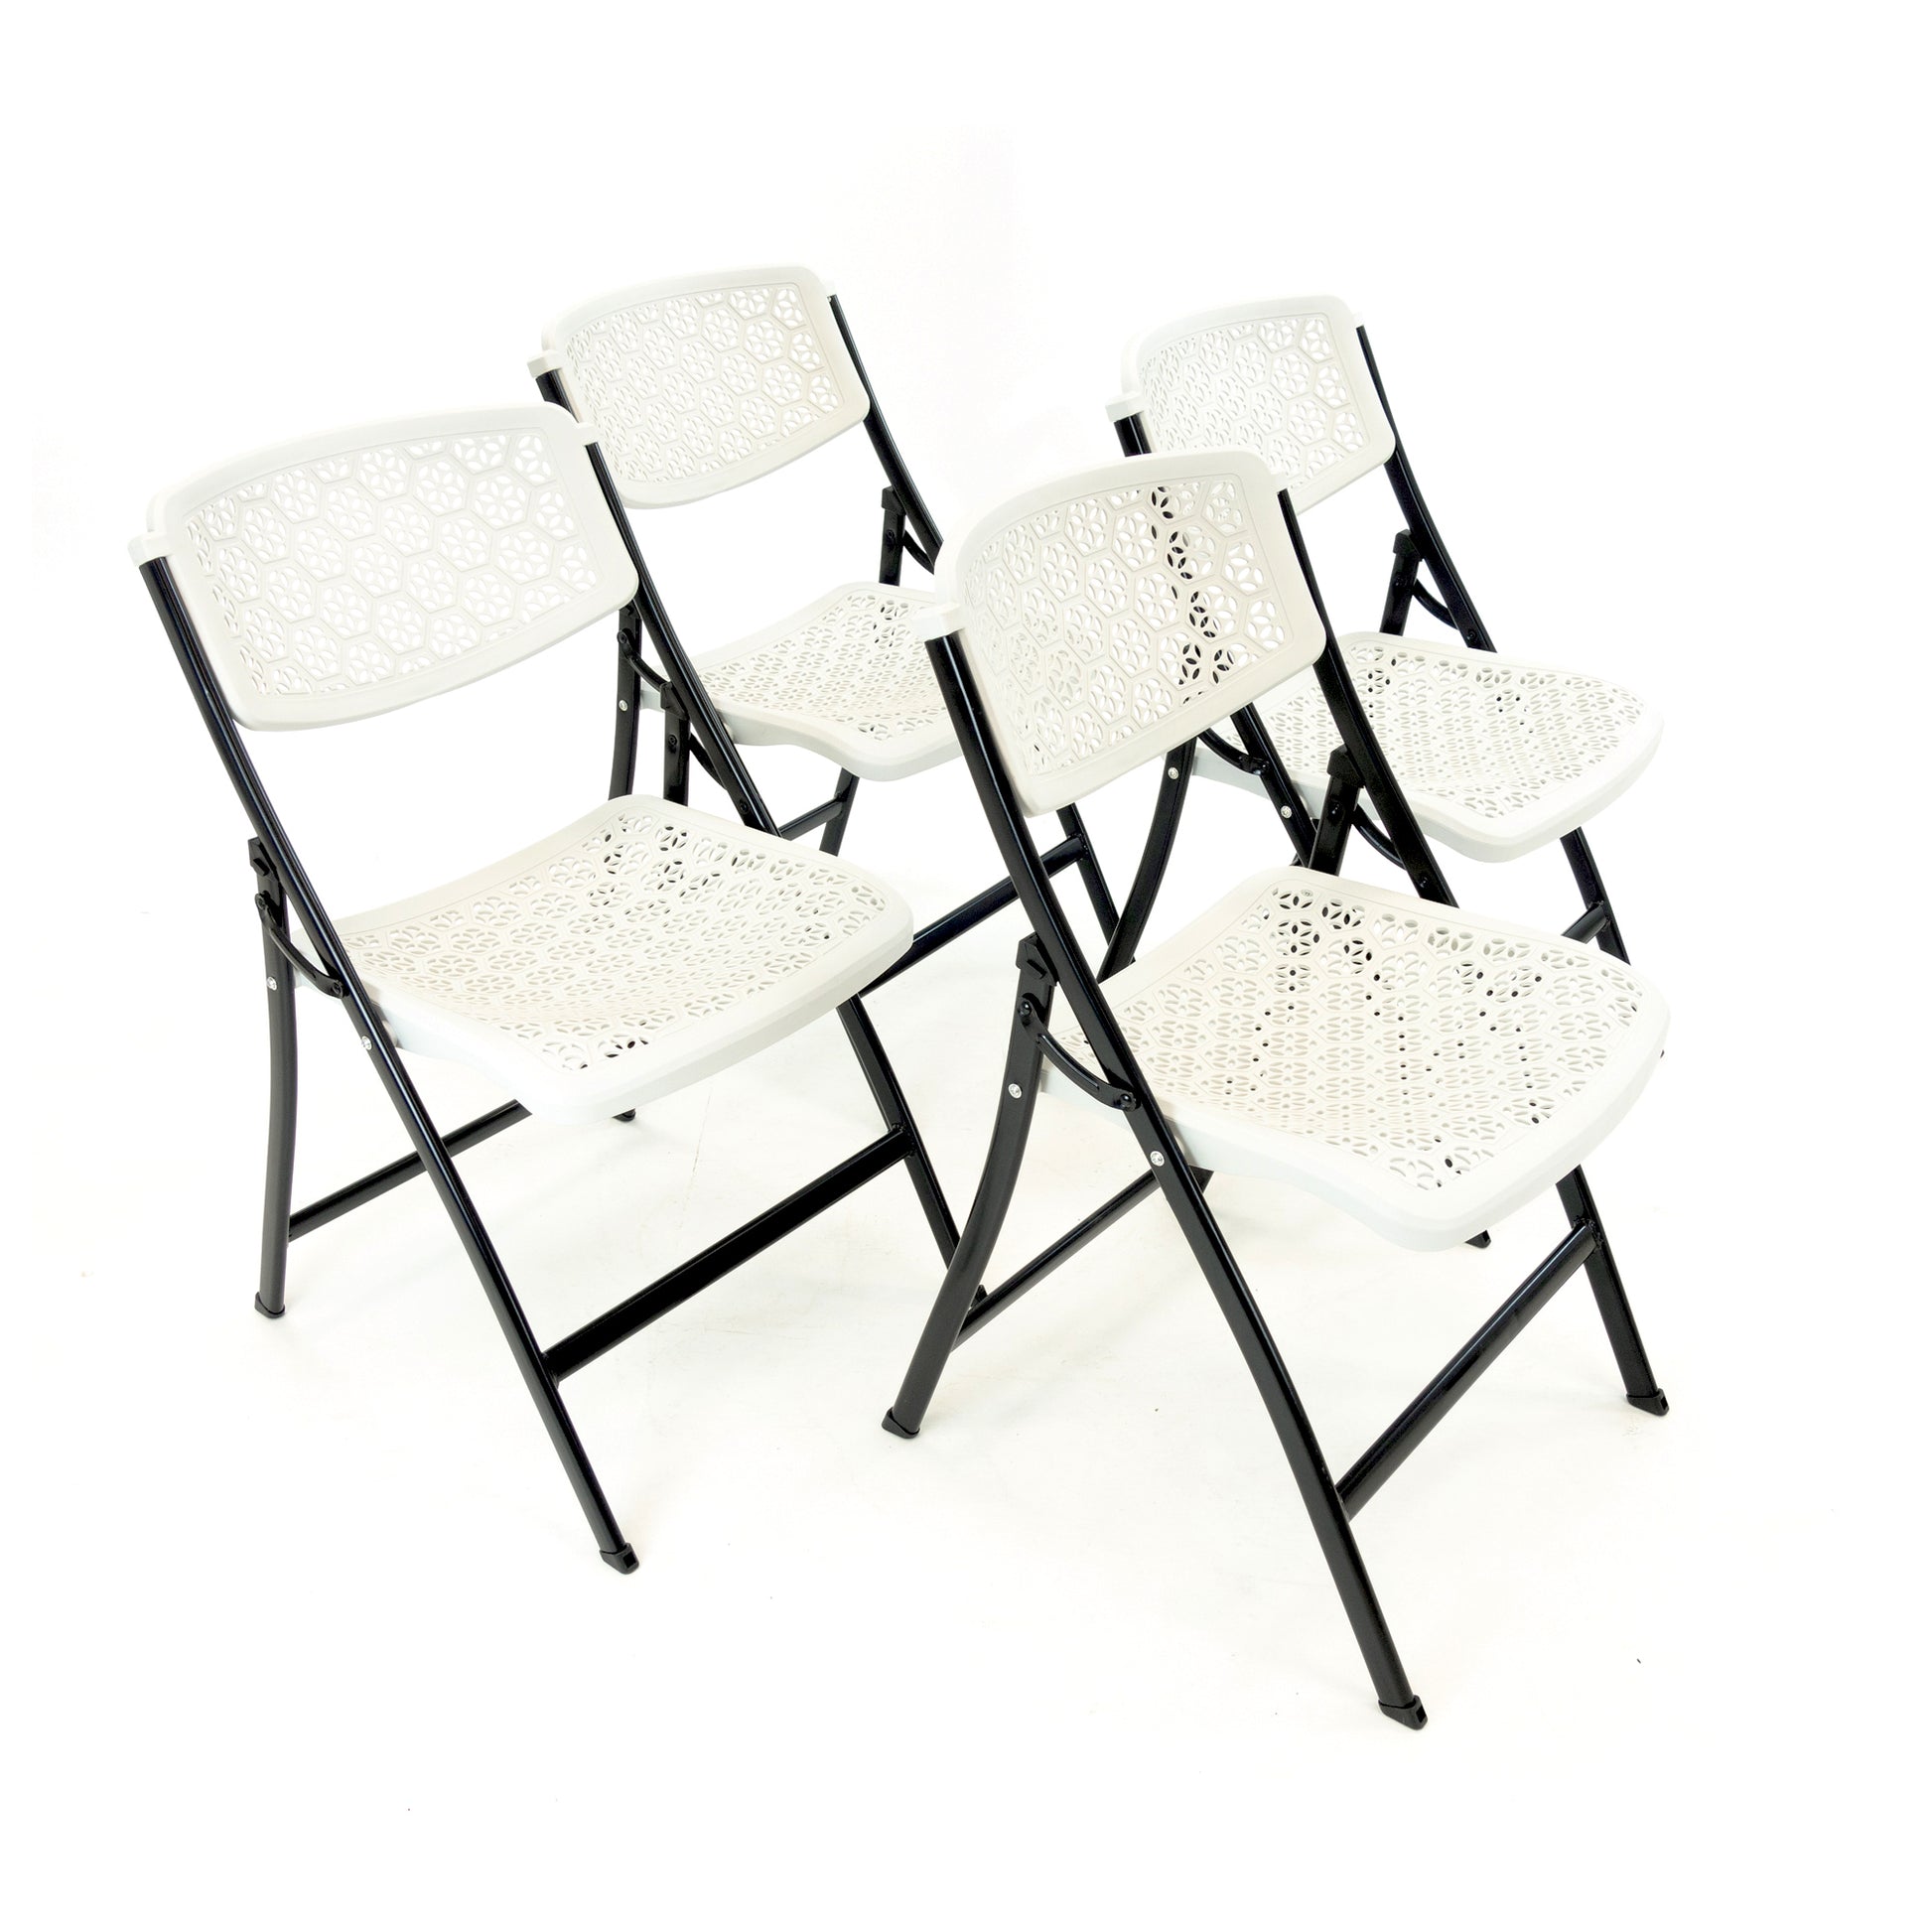 picnic-folding-chairs-with-honeycomb-pattern-white